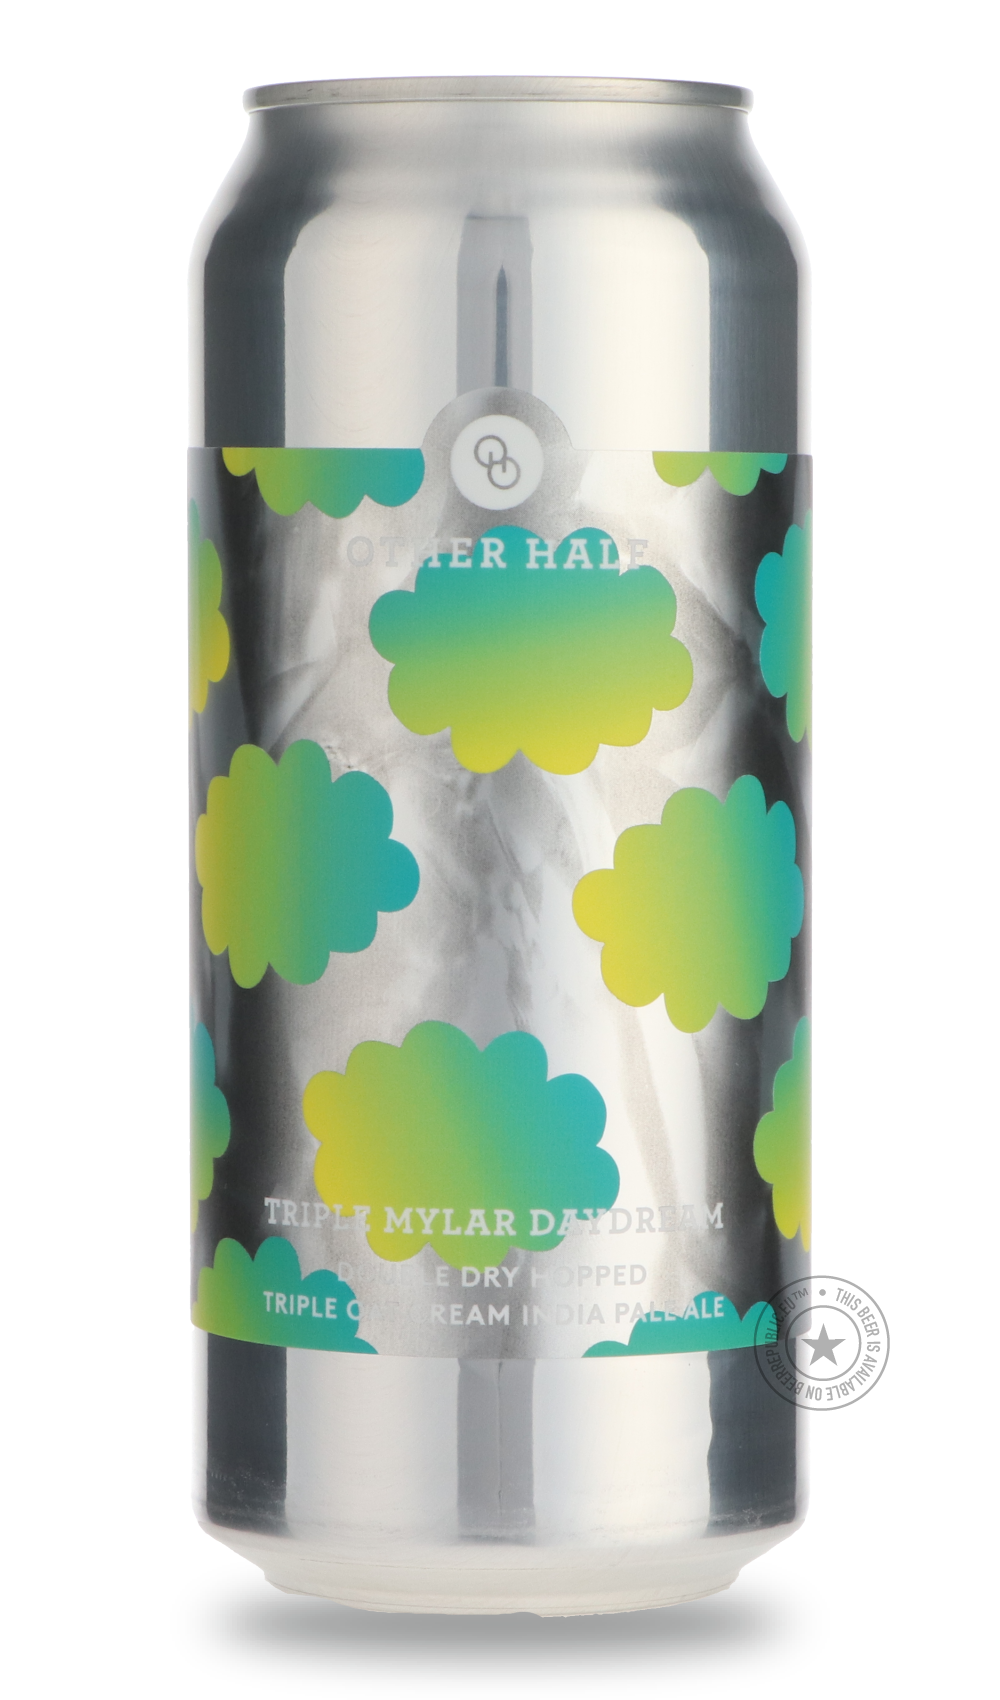 -Other Half- Triple Mylar Daydream-IPA- Only @ Beer Republic - The best online beer store for American & Canadian craft beer - Buy beer online from the USA and Canada - Bier online kopen - Amerikaans bier kopen - Craft beer store - Craft beer kopen - Amerikanisch bier kaufen - Bier online kaufen - Acheter biere online - IPA - Stout - Porter - New England IPA - Hazy IPA - Imperial Stout - Barrel Aged - Barrel Aged Imperial Stout - Brown - Dark beer - Blond - Blonde - Pilsner - Lager - Wheat - Weizen - Amber 